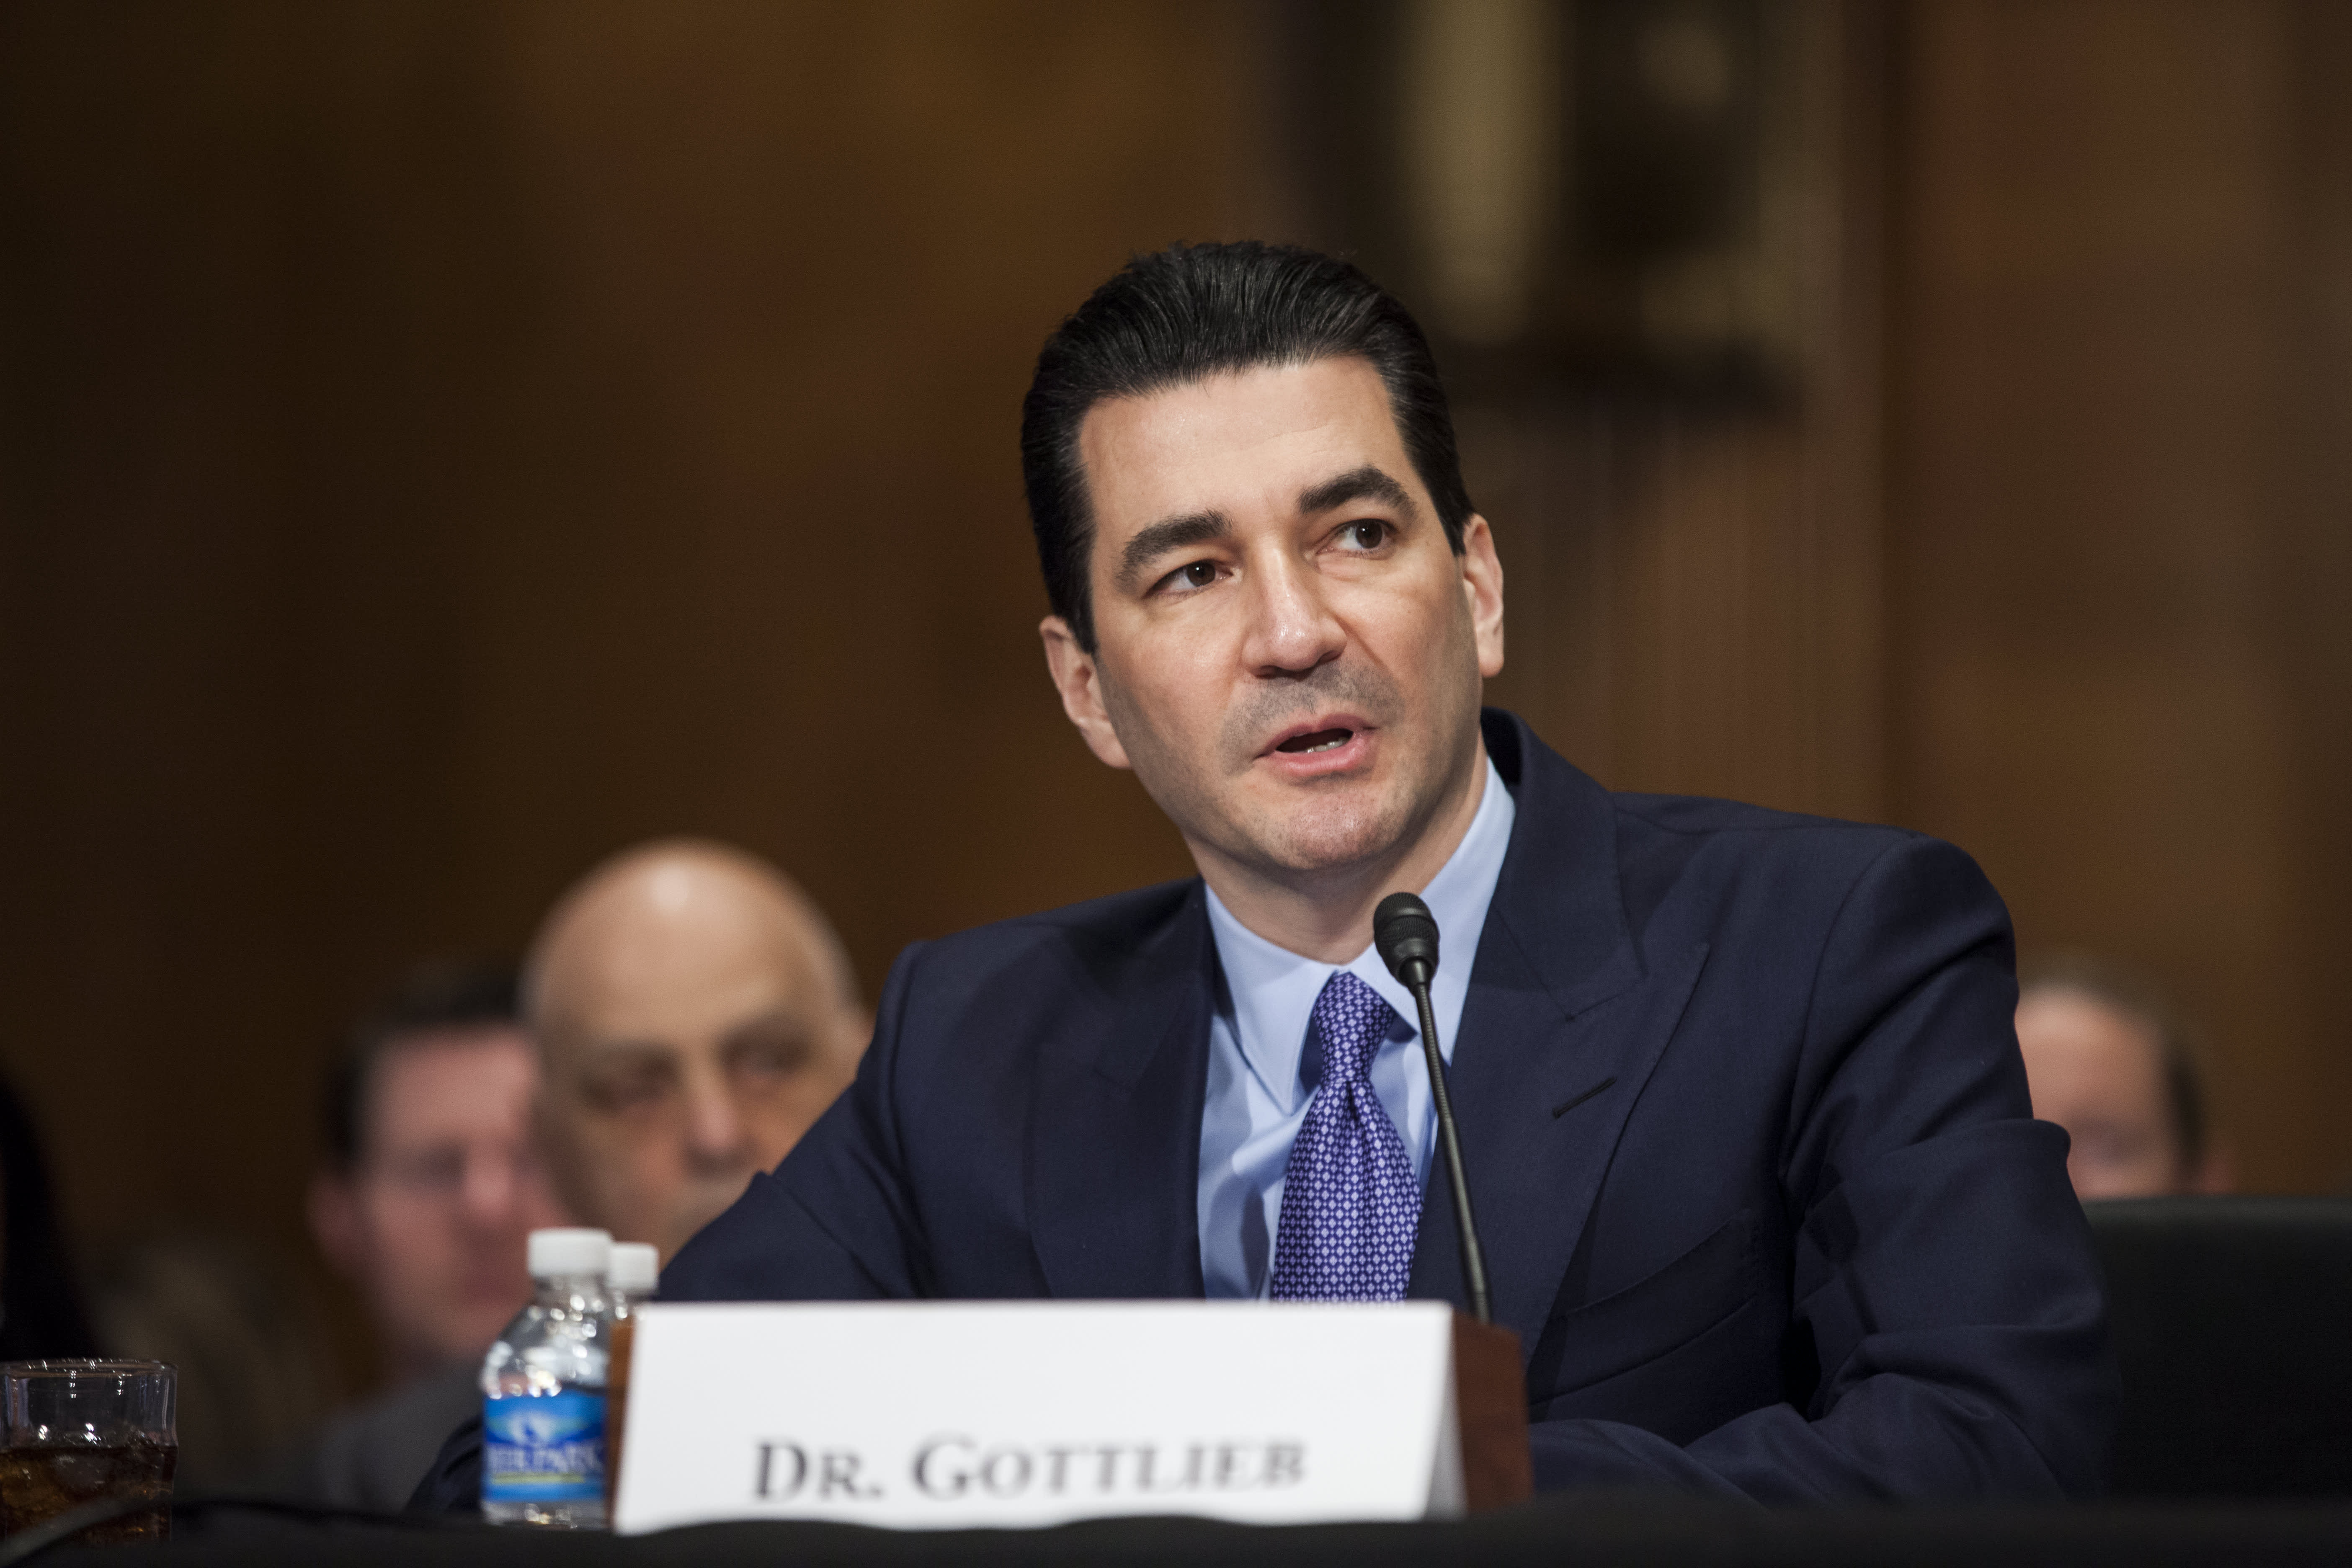 Dr. Scott Gottlieb sees Covid vaccine boosters for vulnerable people in U.S. as early as September - CNBC